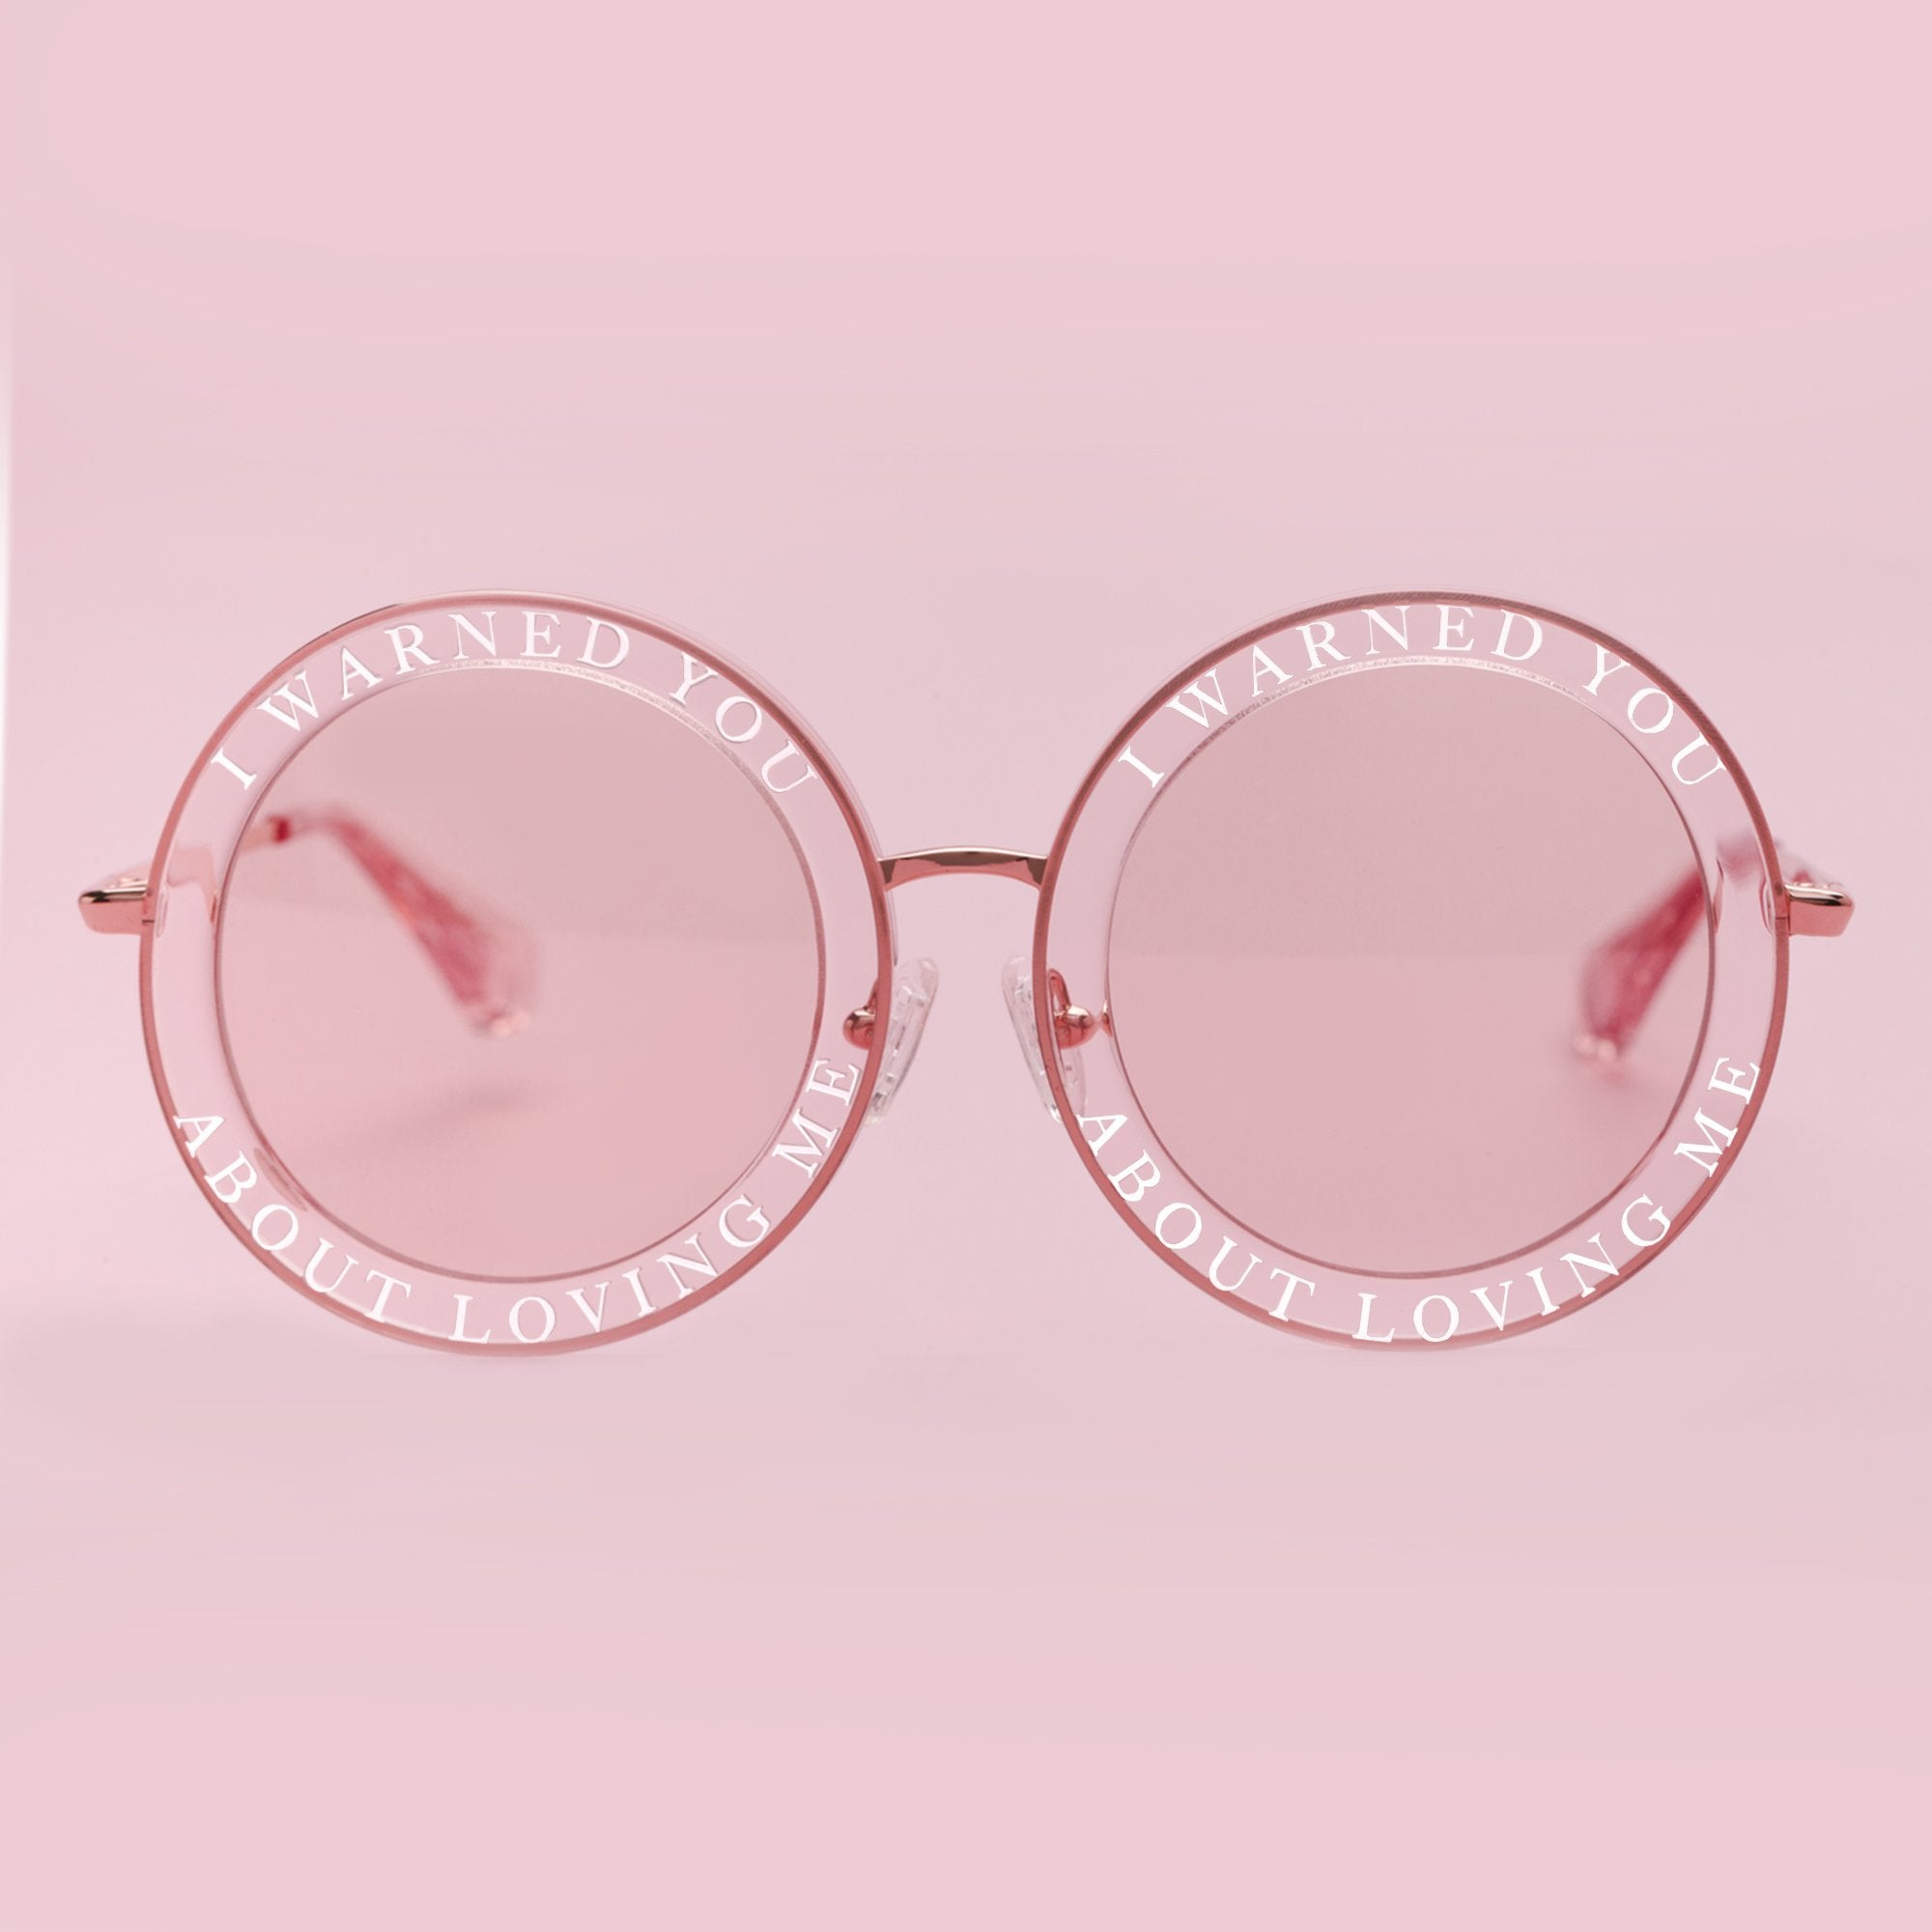 Reve by Rene Honey Trap sunglasses in Pink